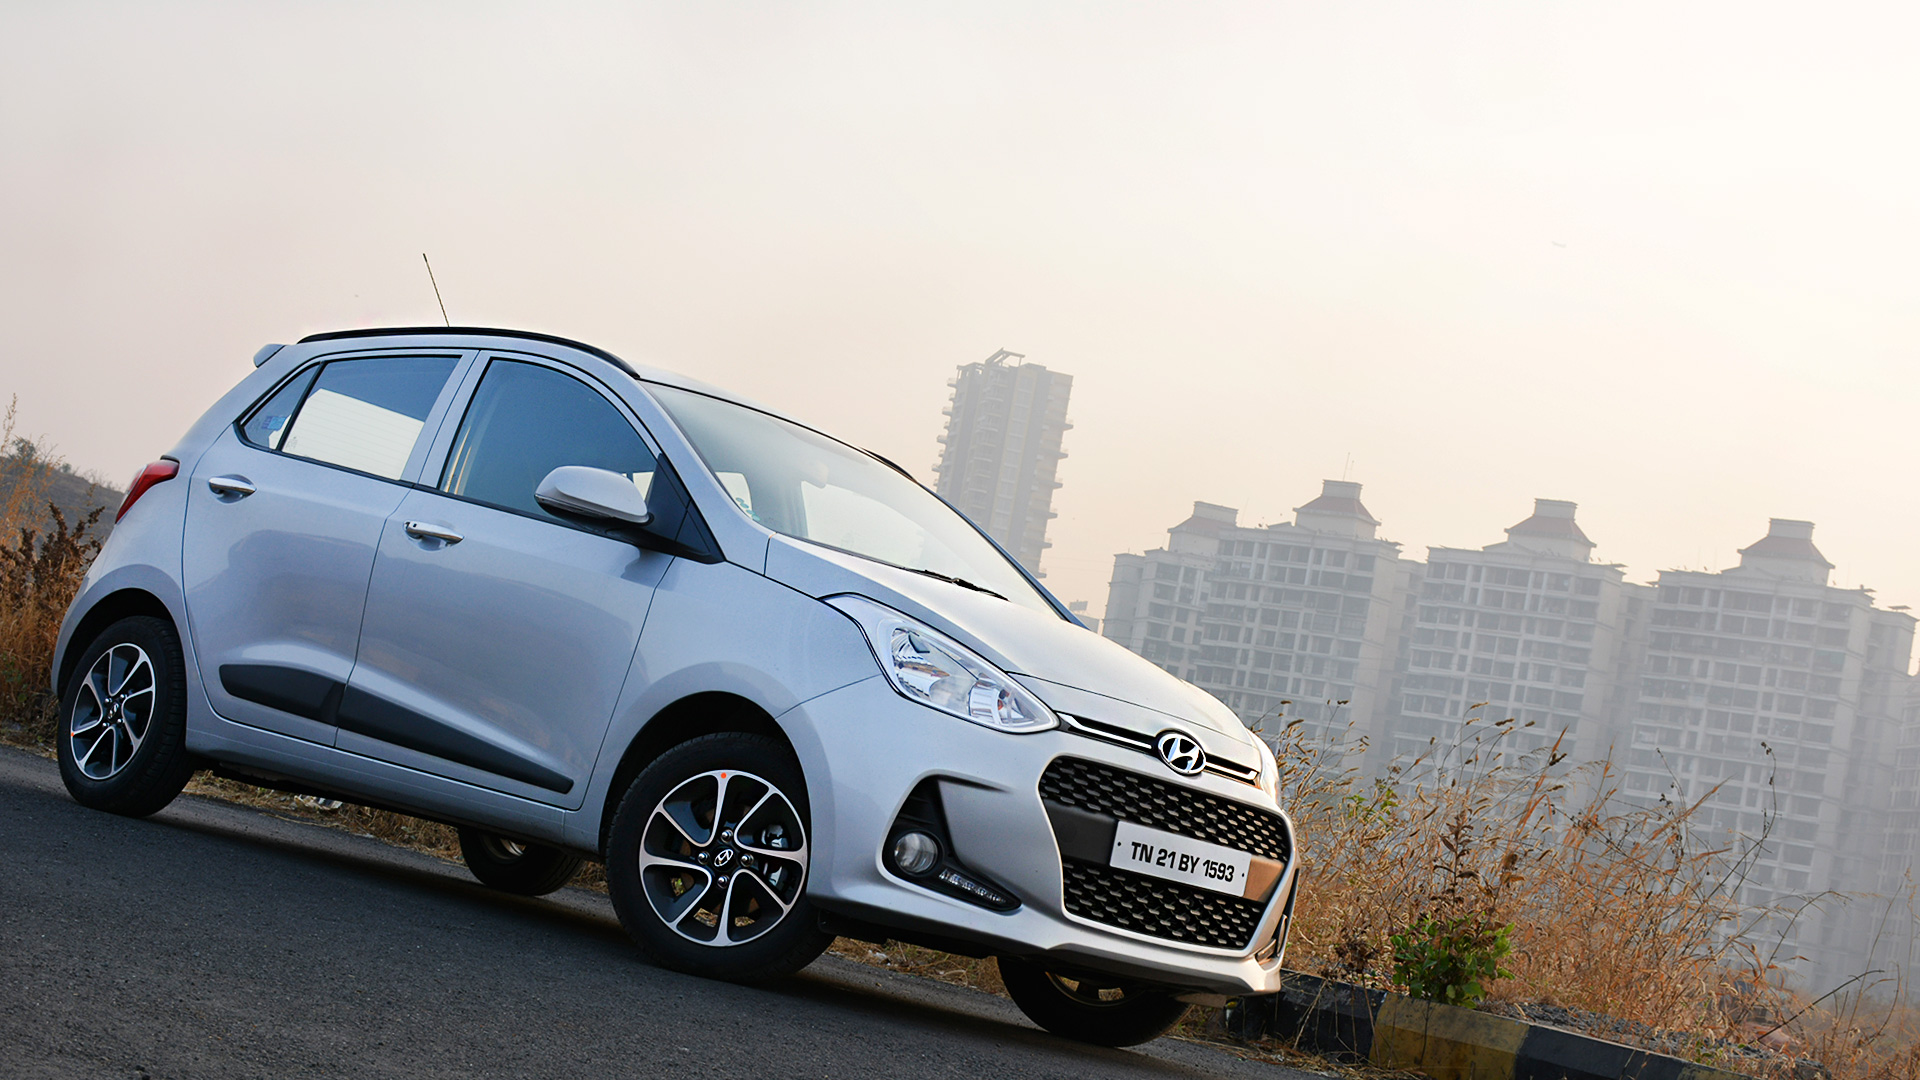 Hyundai Grand i10 2017 Sportz Diesel - Price in India, Mileage, Reviews,  Colours, Specification, Images - Overdrive